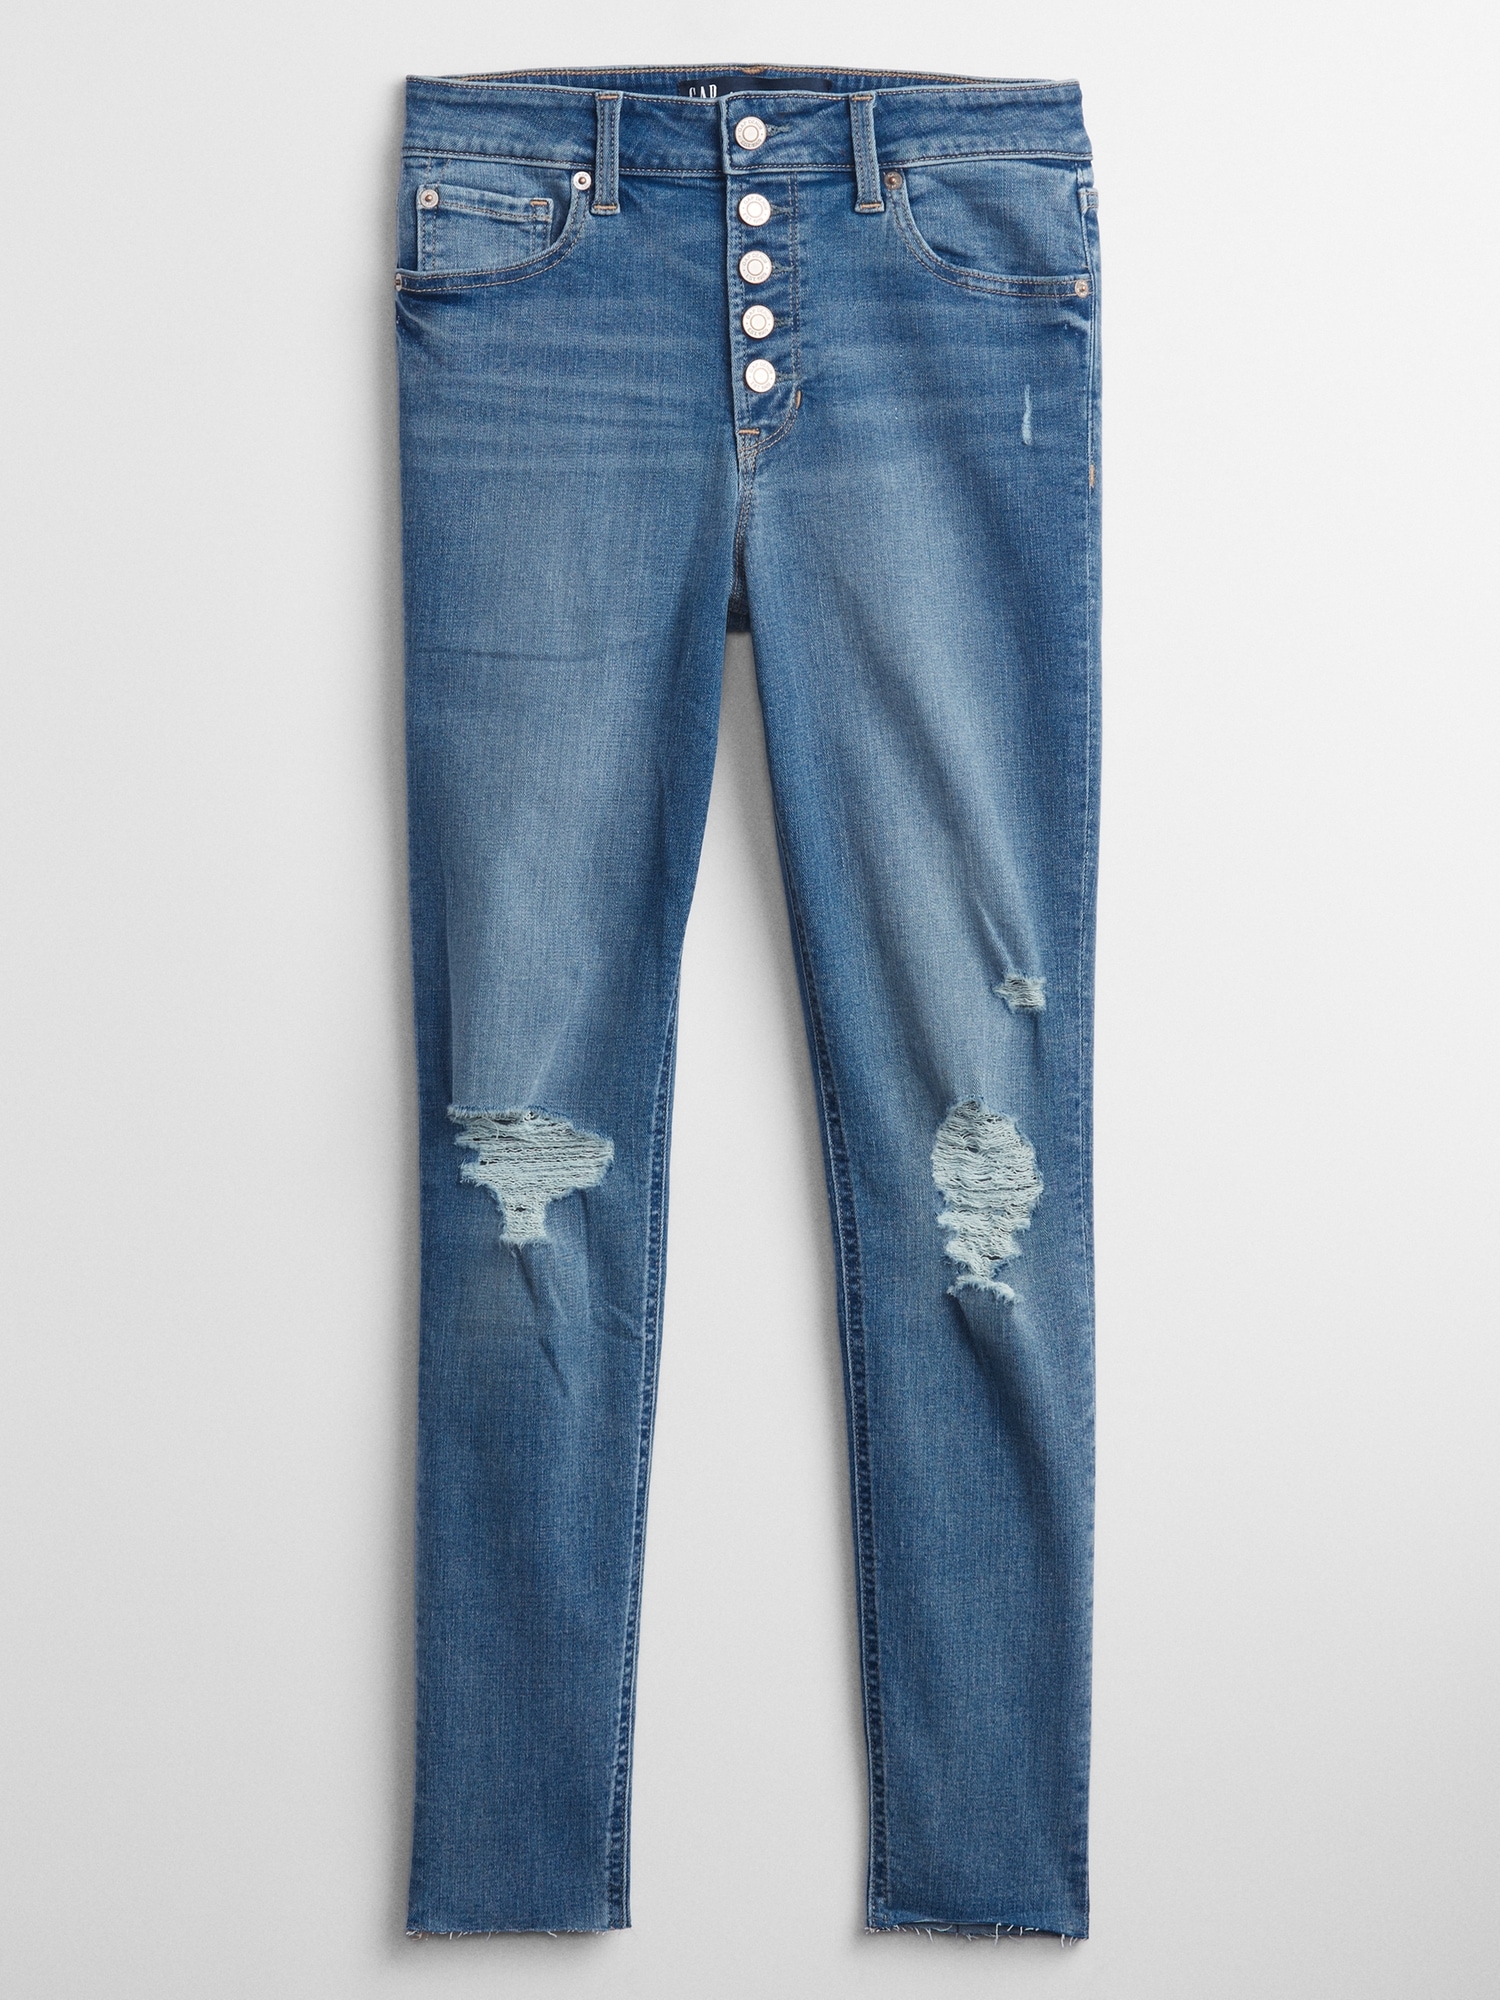 Buy Gap High Waisted Universal Legging Jeans from the Laura Ashley online  shop